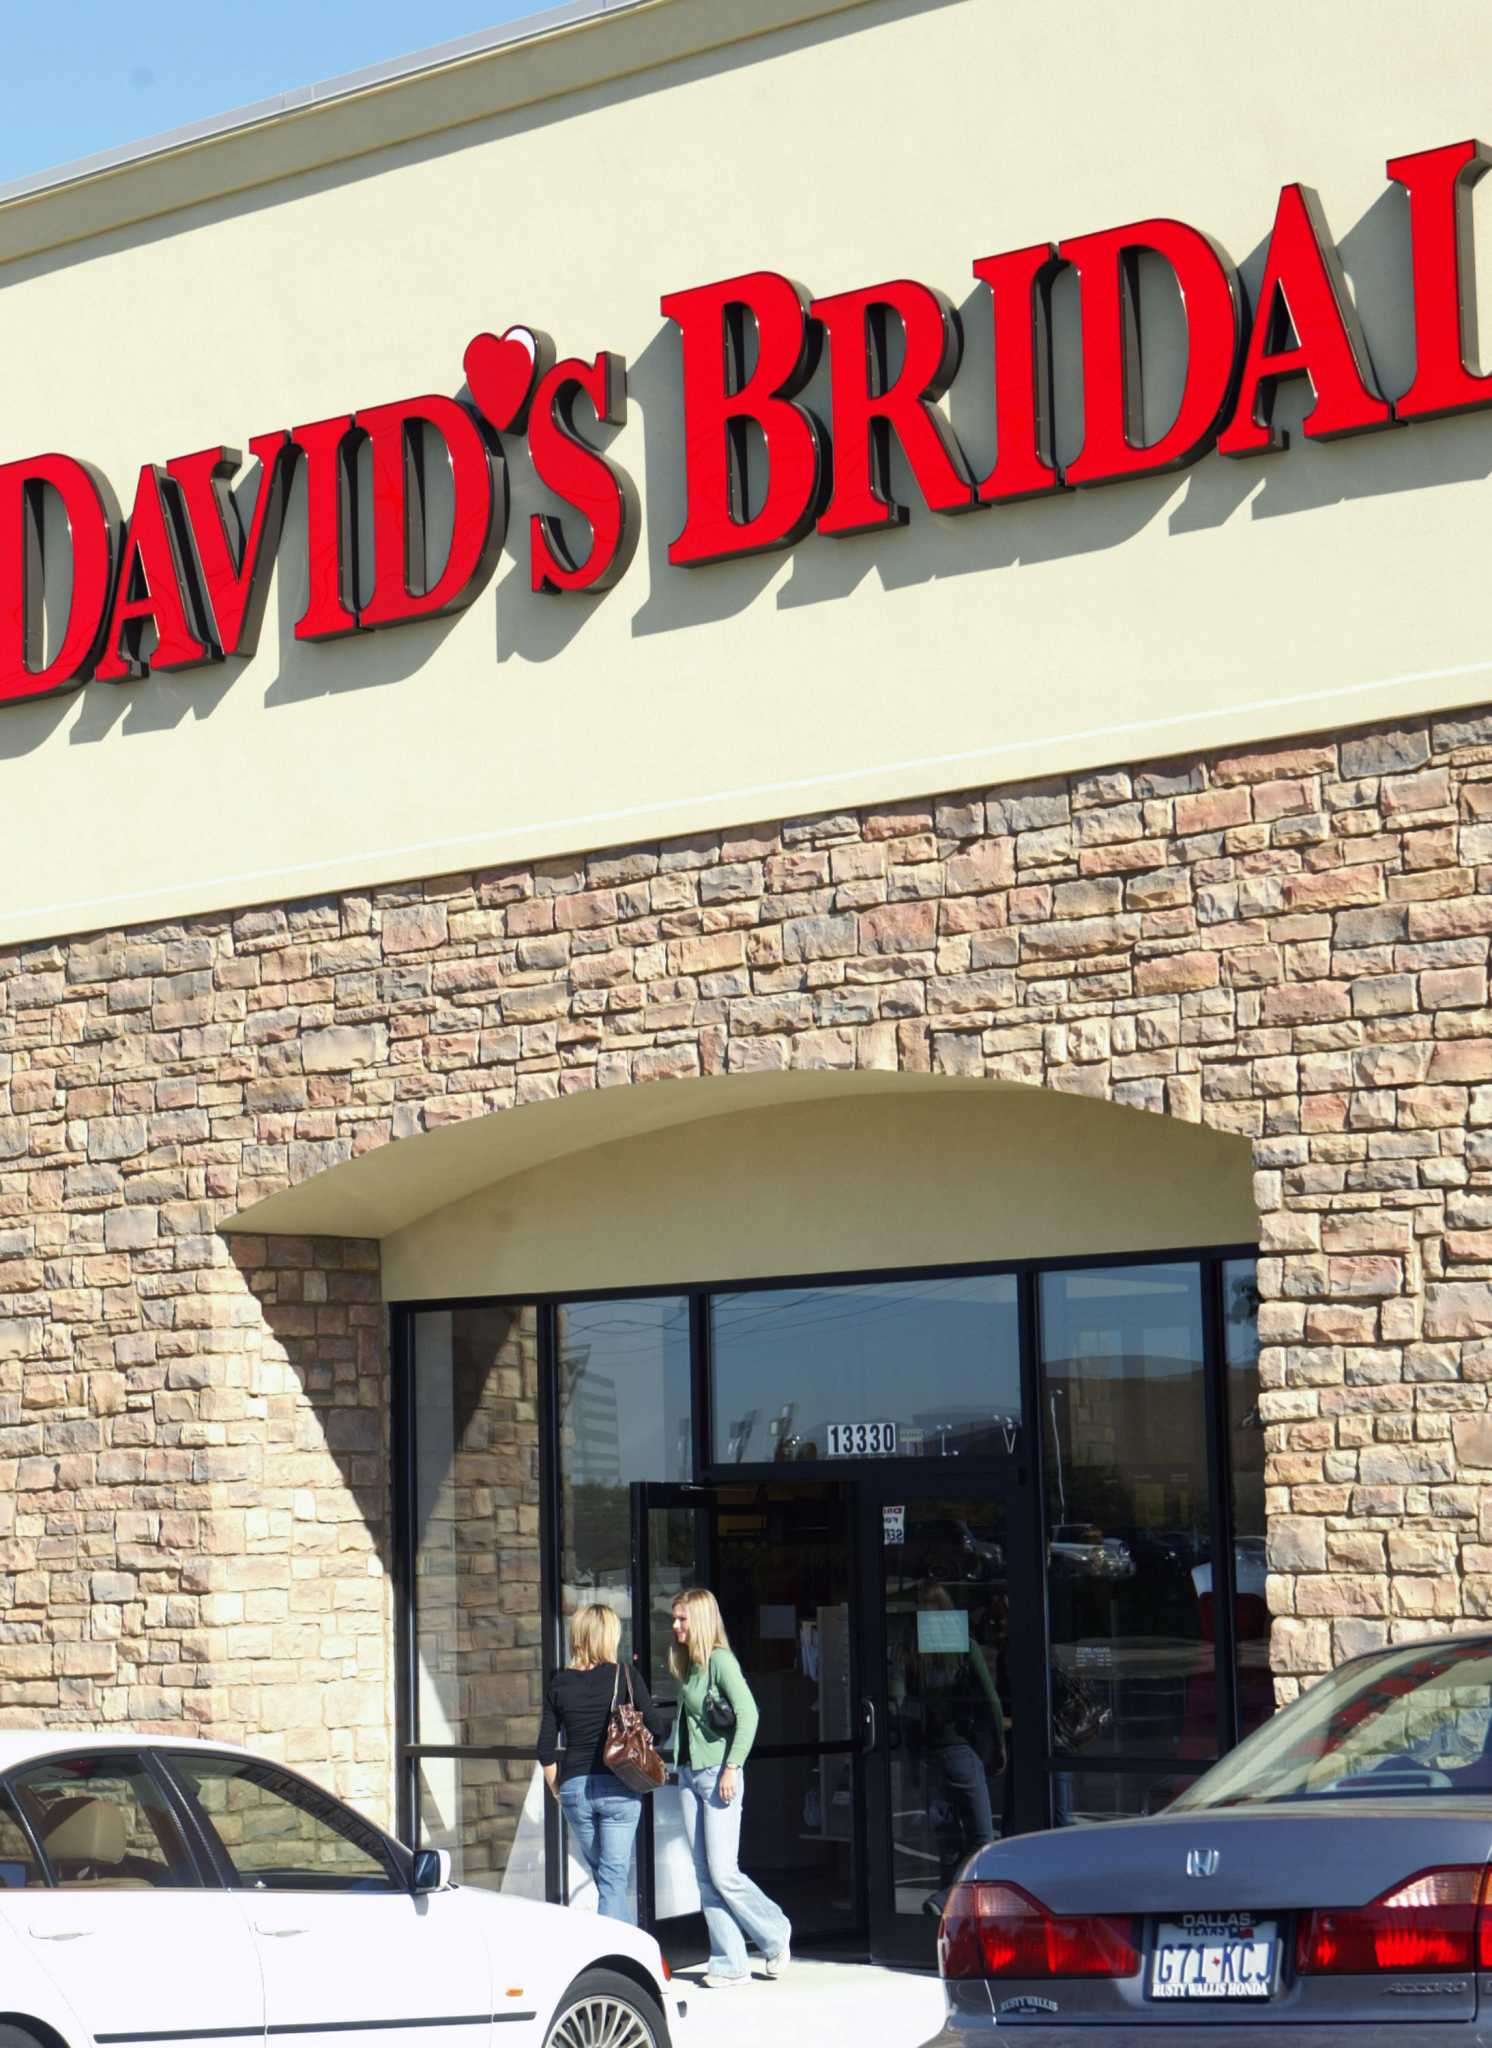 David's Bridal files for bankruptcy protection